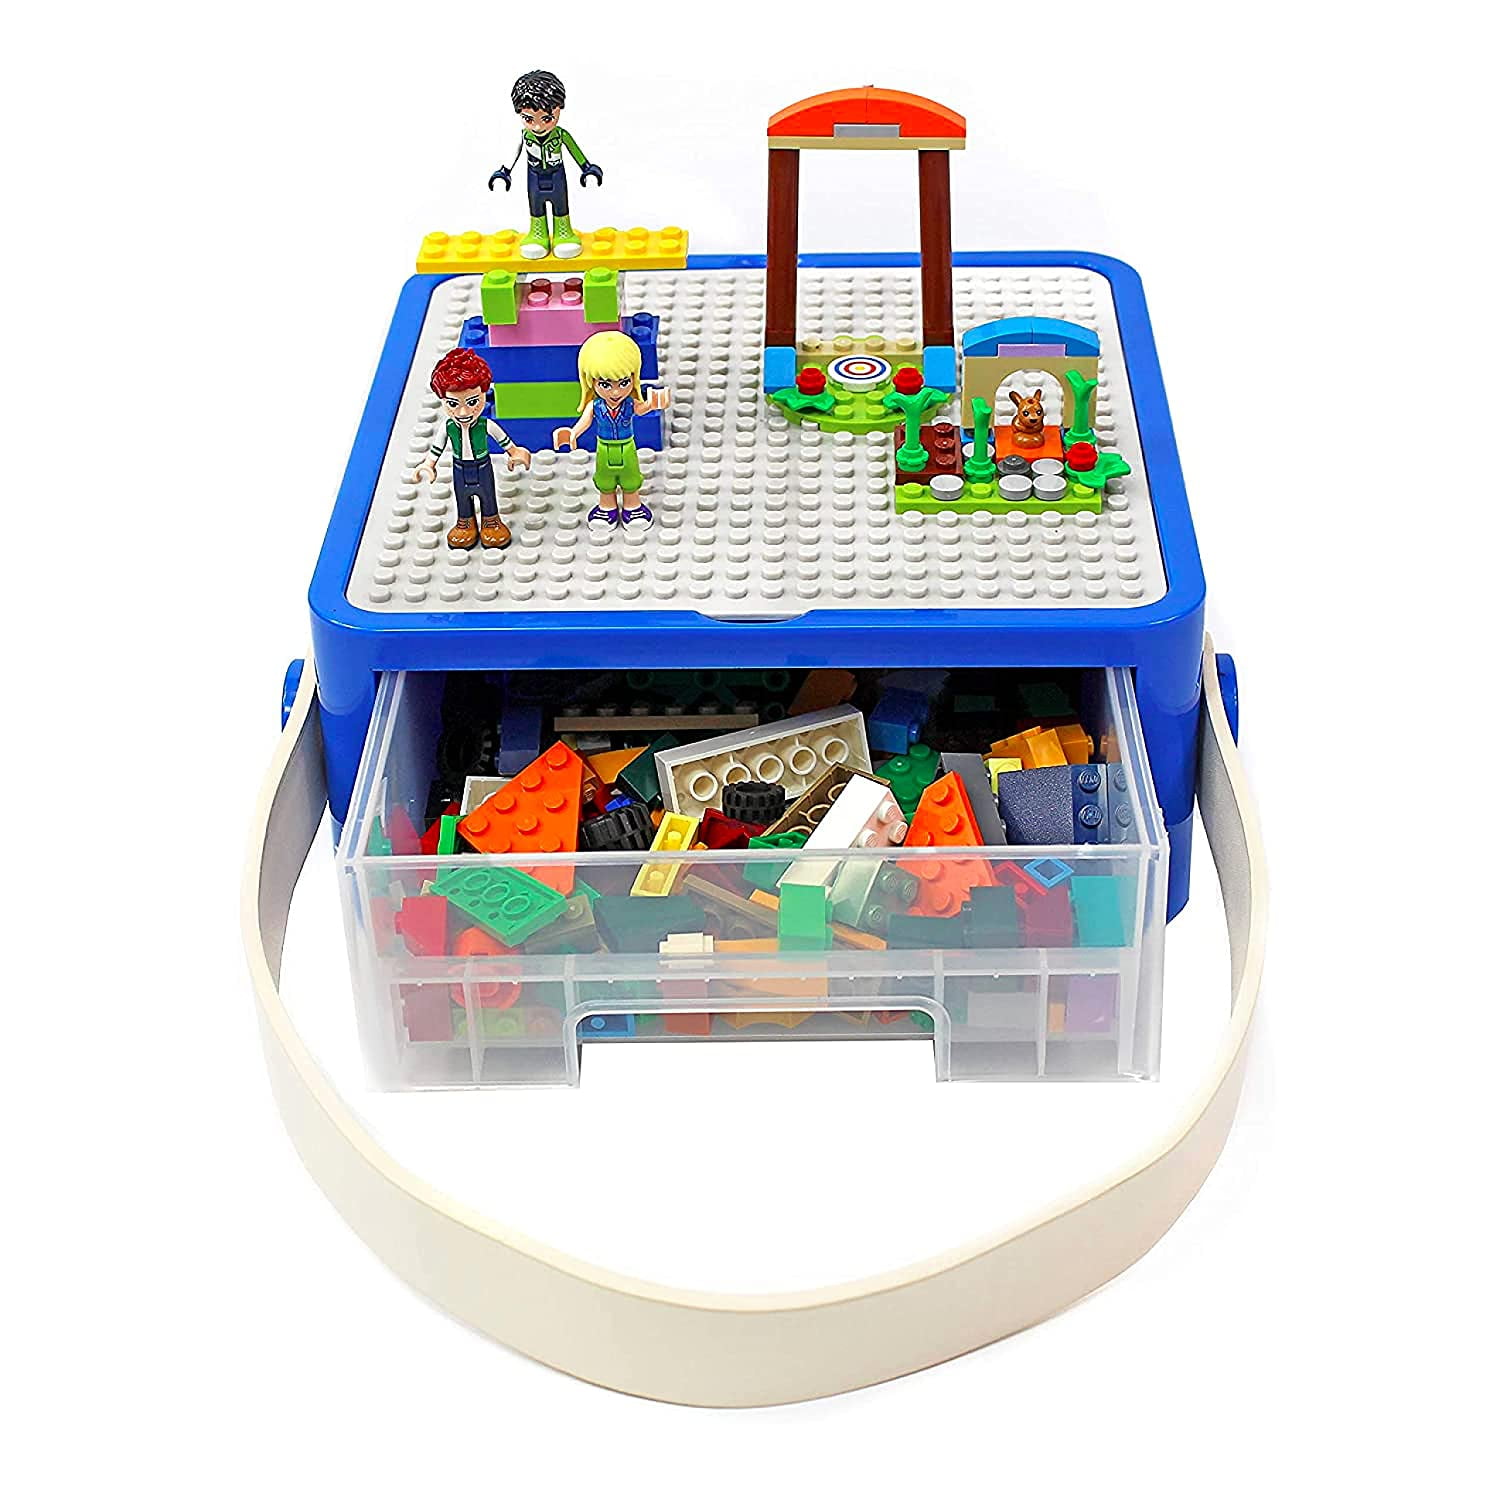 Bins Things Lego-Compatible Storage Container With Lego Compatible Building -